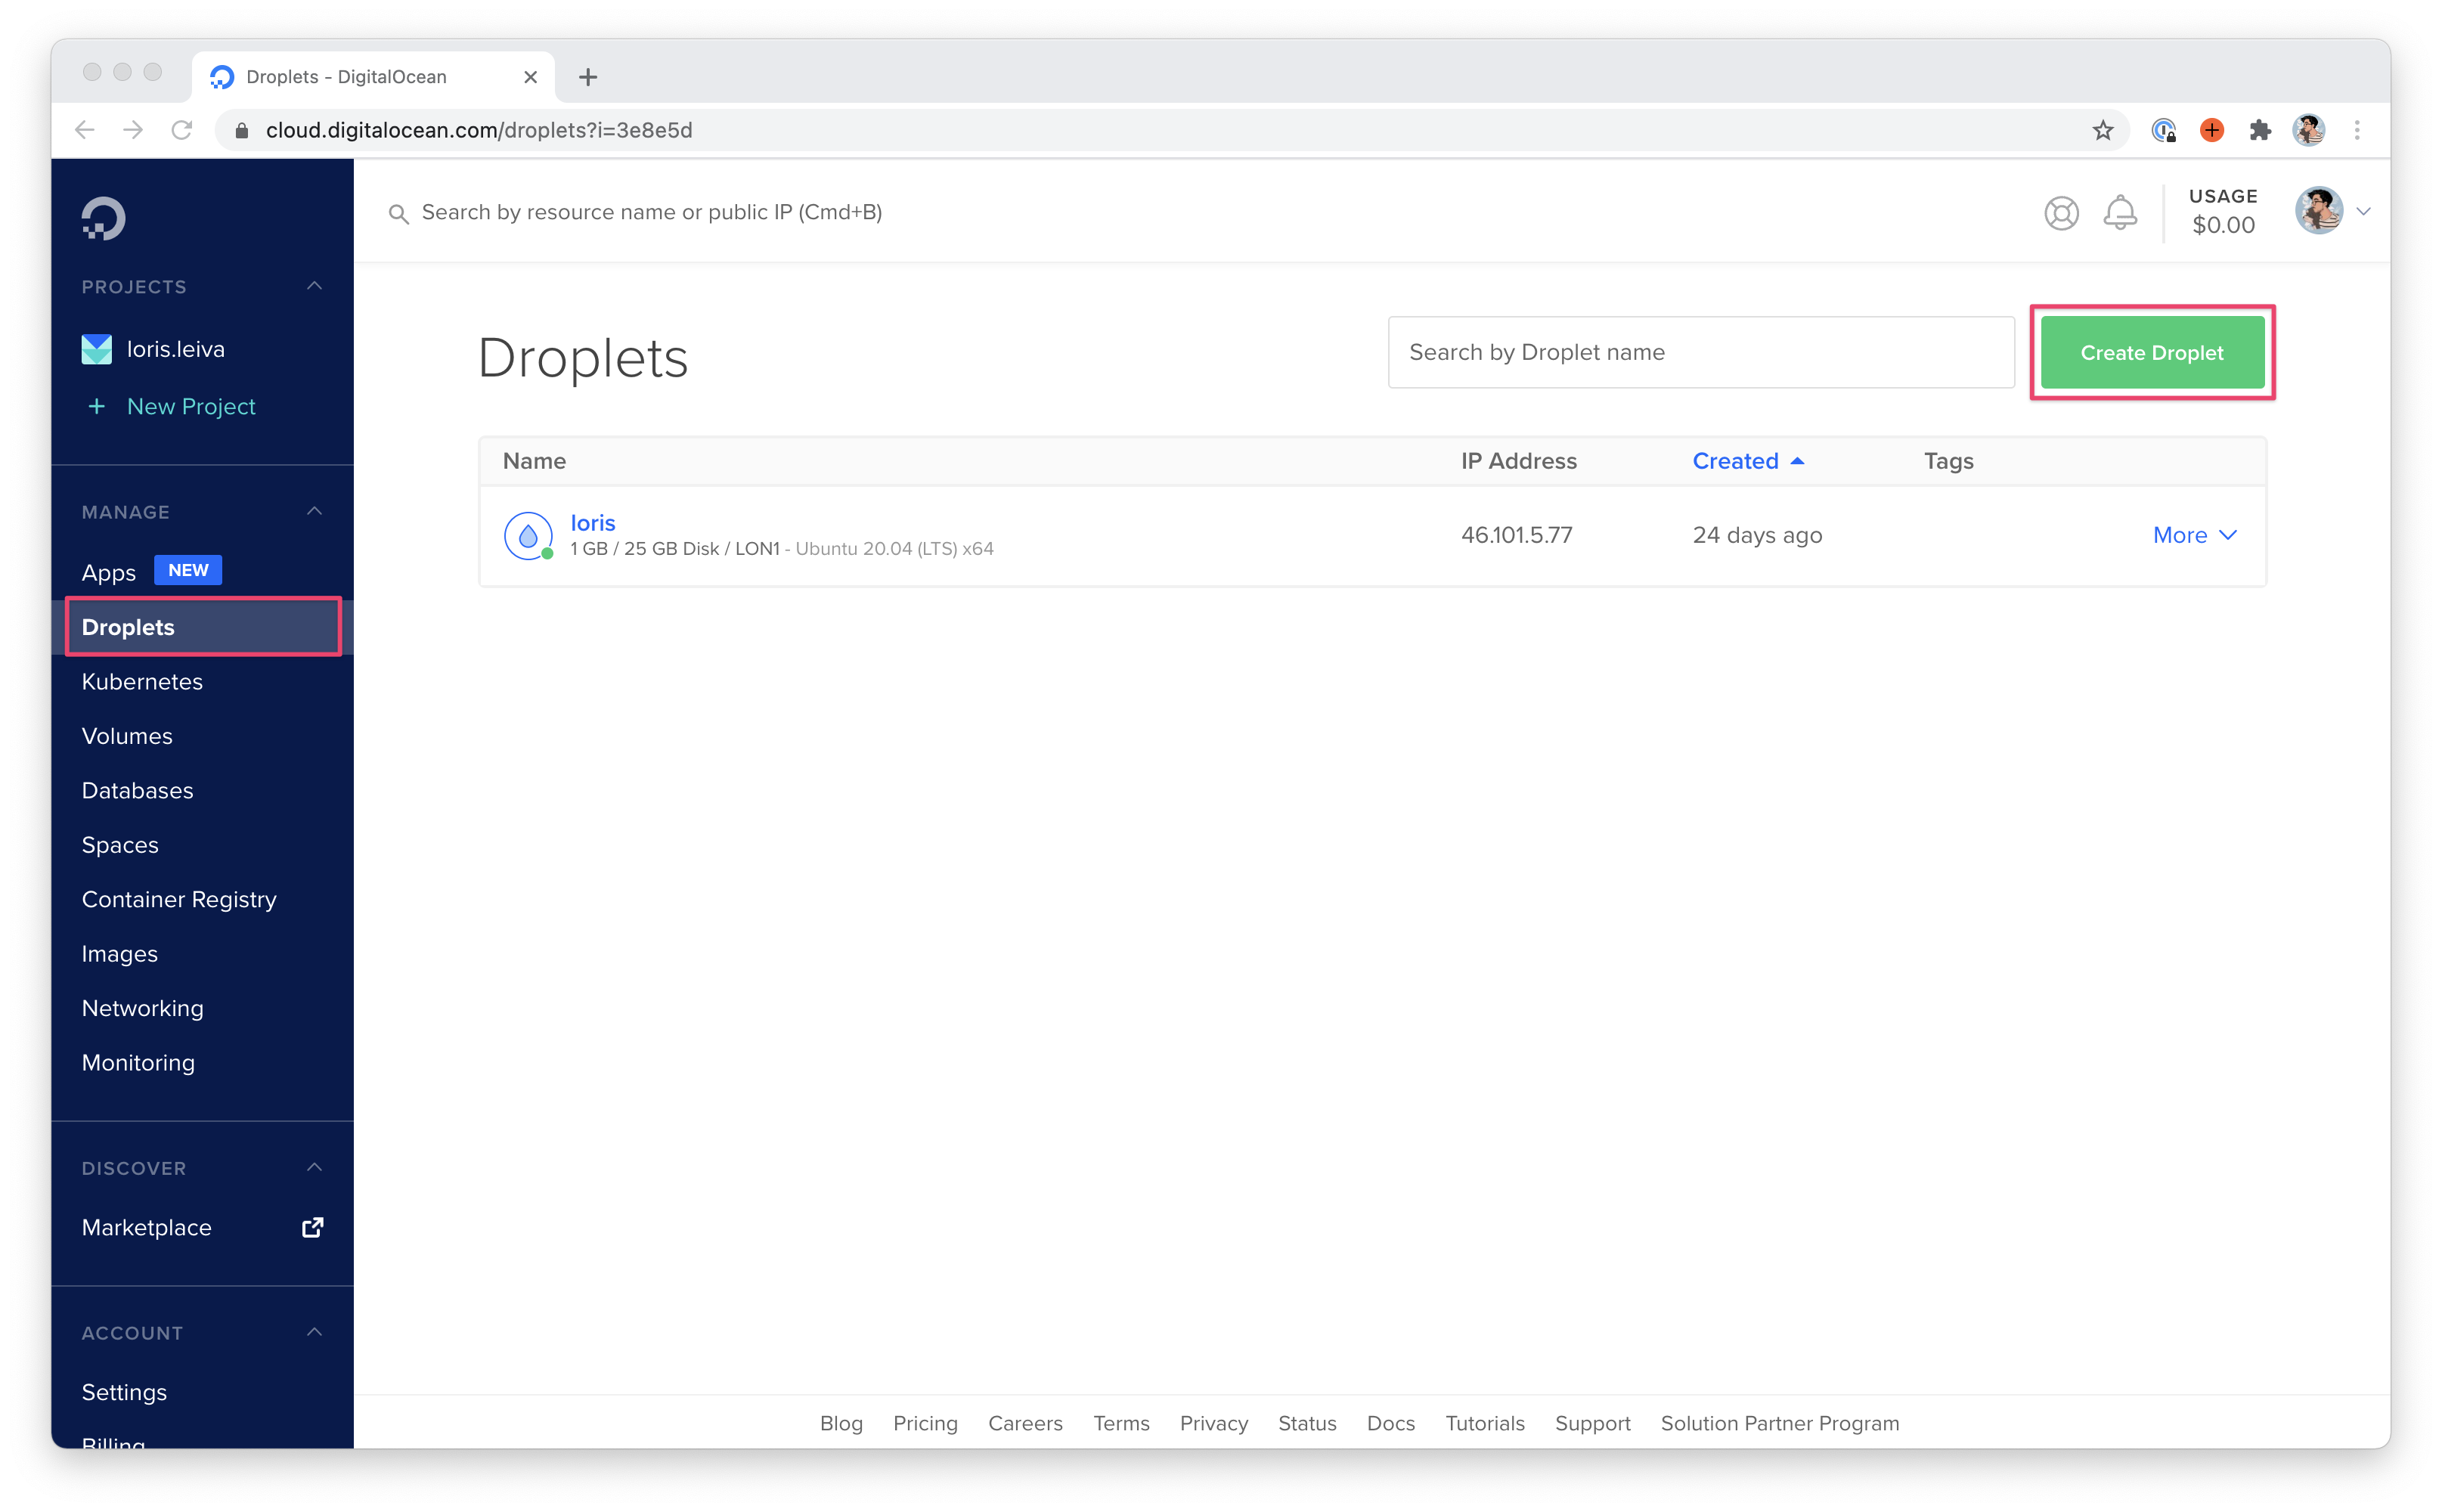 Screenshot of the droplets page on Digital Ocean.